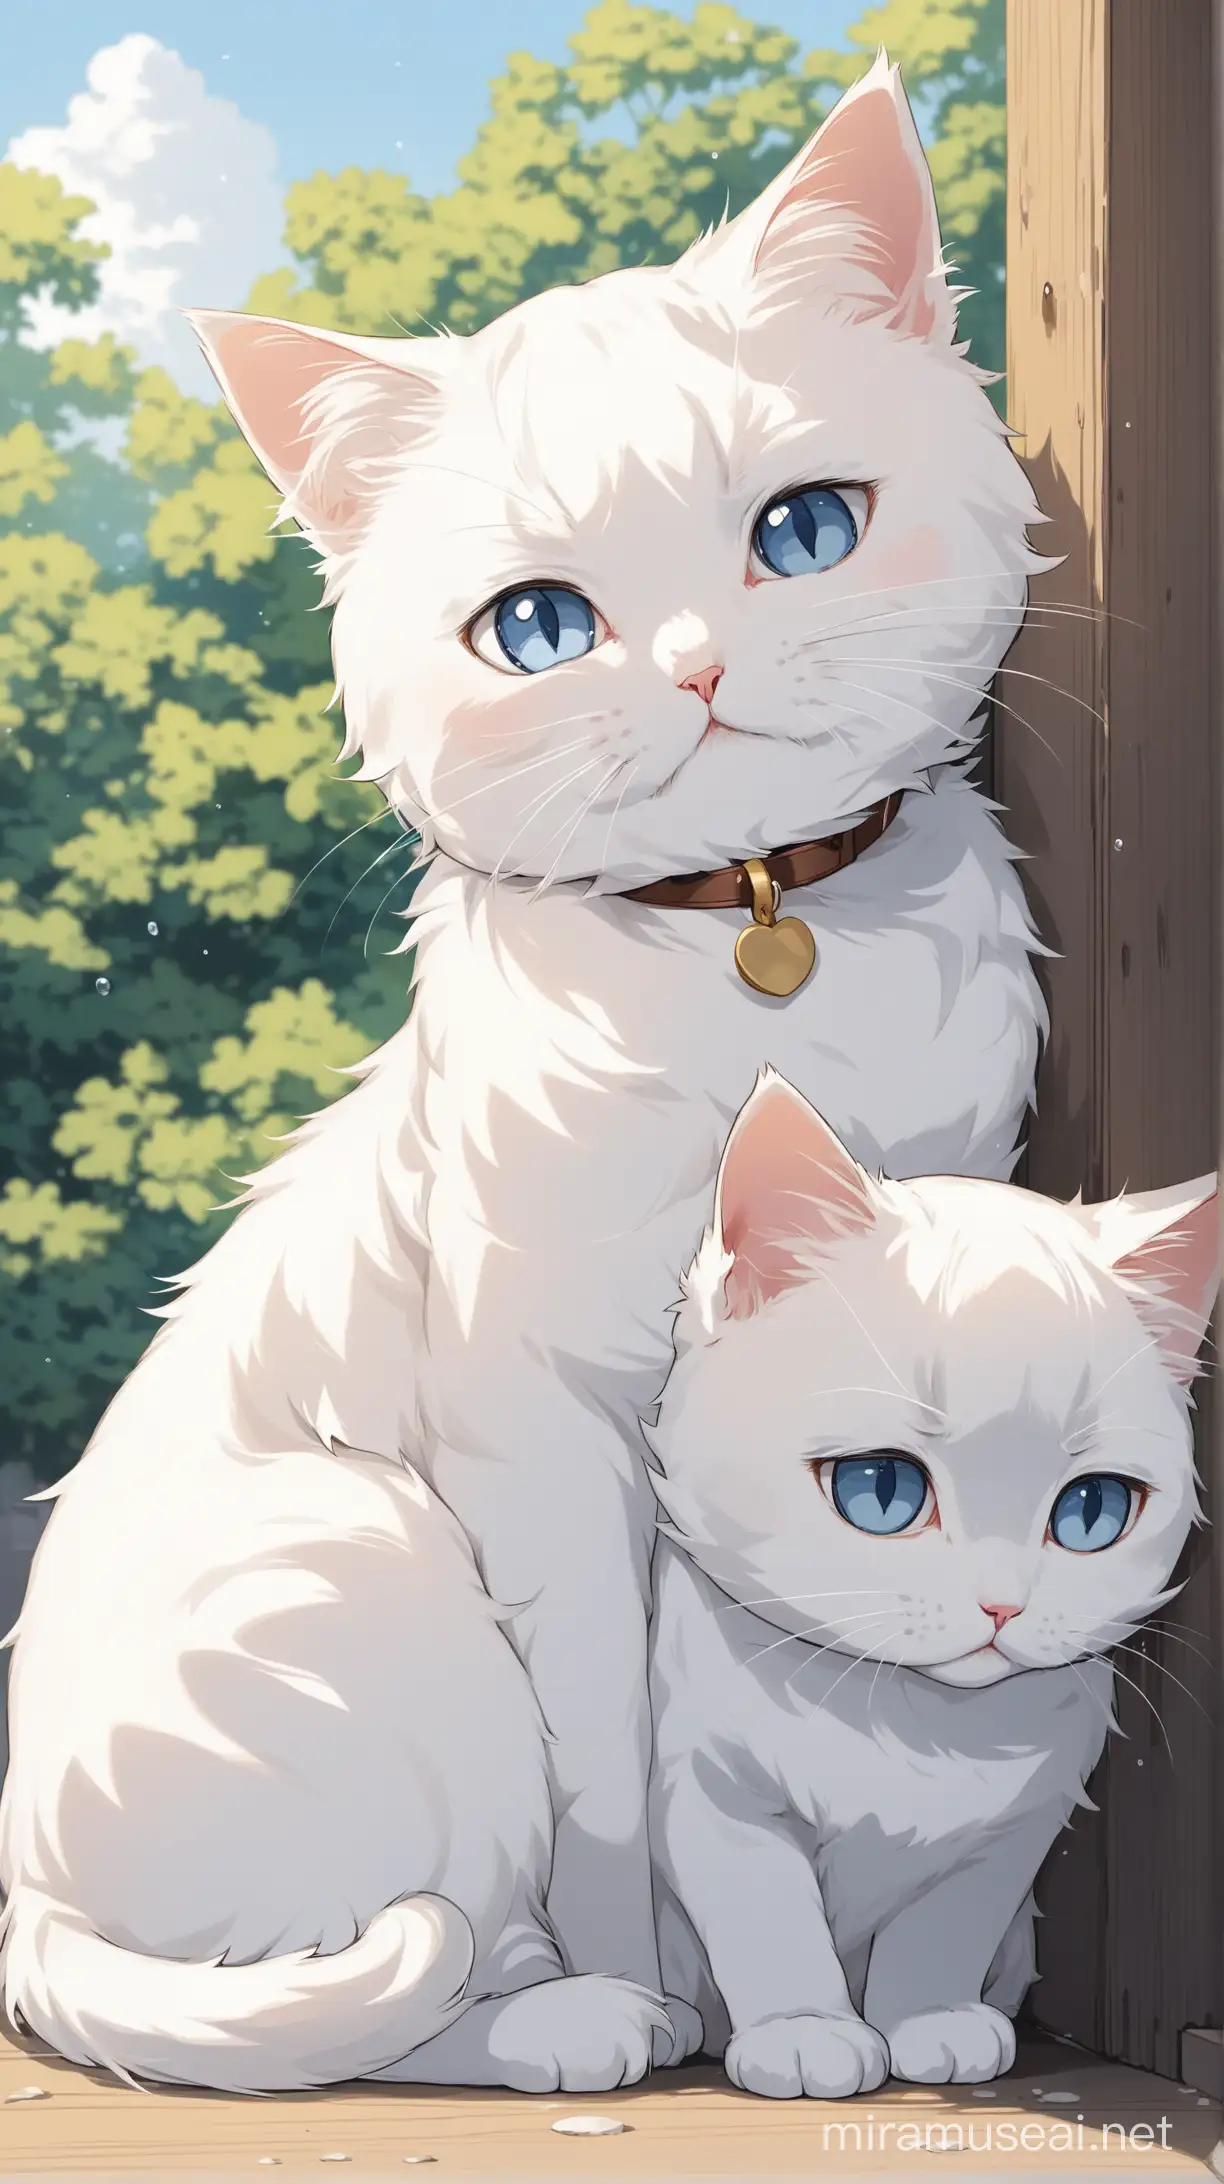 Adorable White Cats Displaying Melancholic Expressions